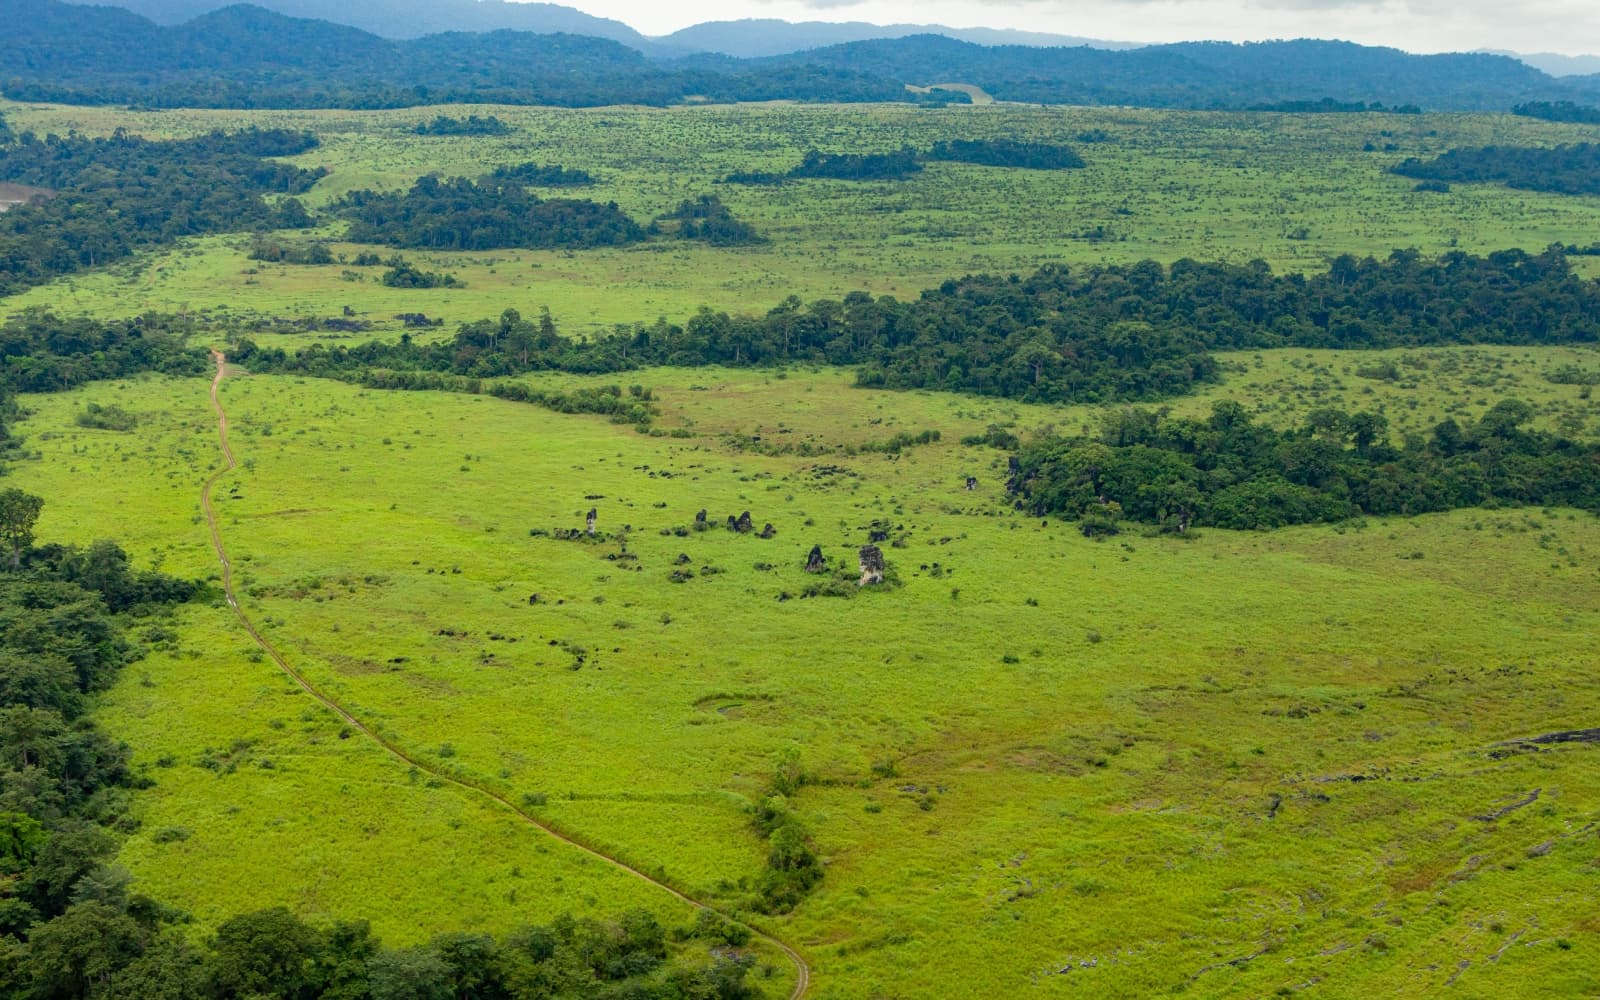 Gabon’s forests nourish the Sahel and Blue Nile. What happens if they vanish?